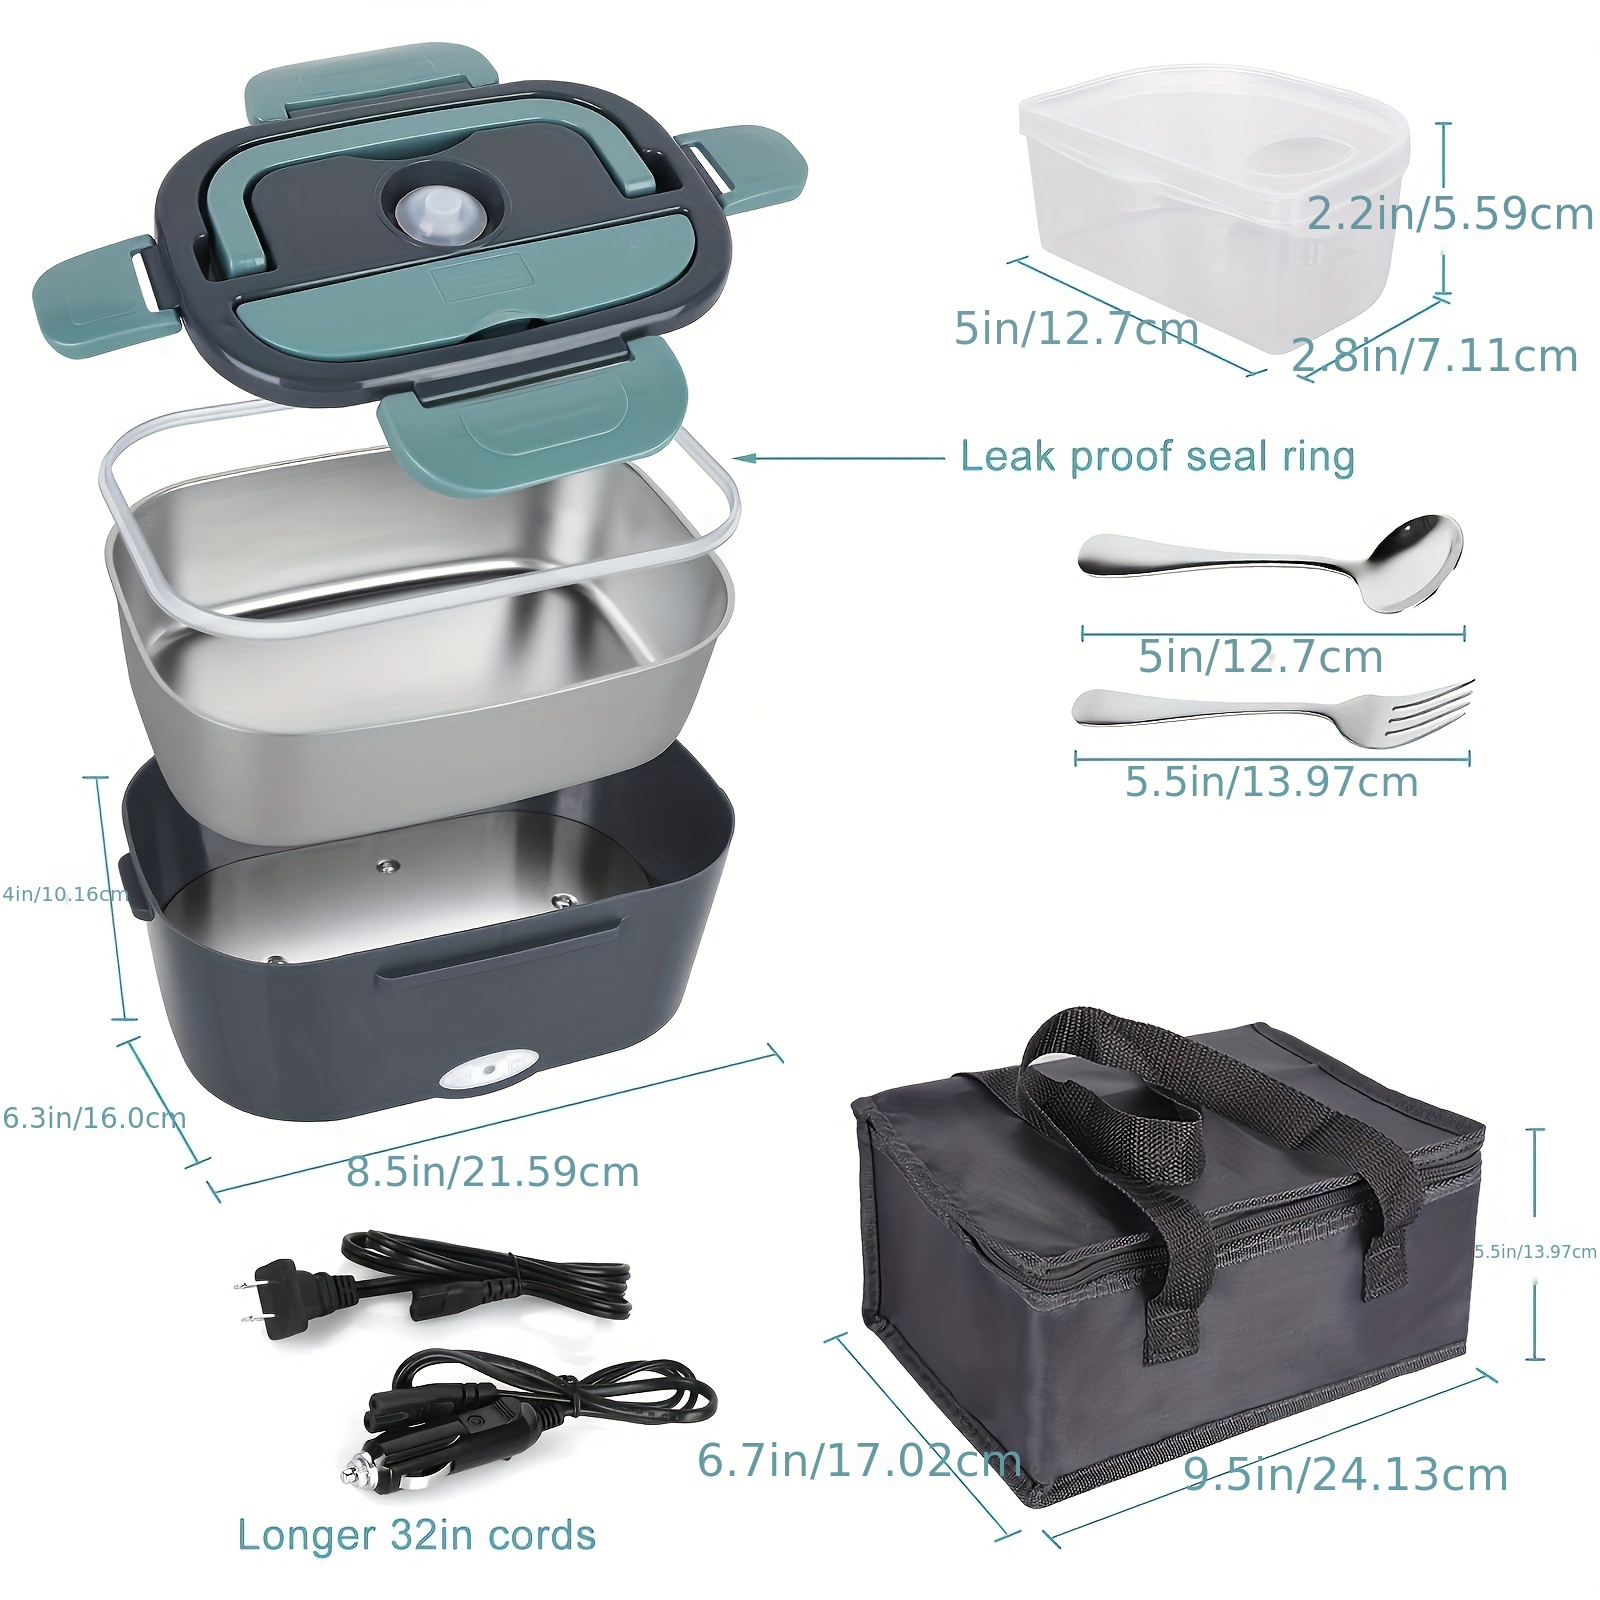 Electric Lunch Box 3 In 1 For Car/truck And Office, Portable